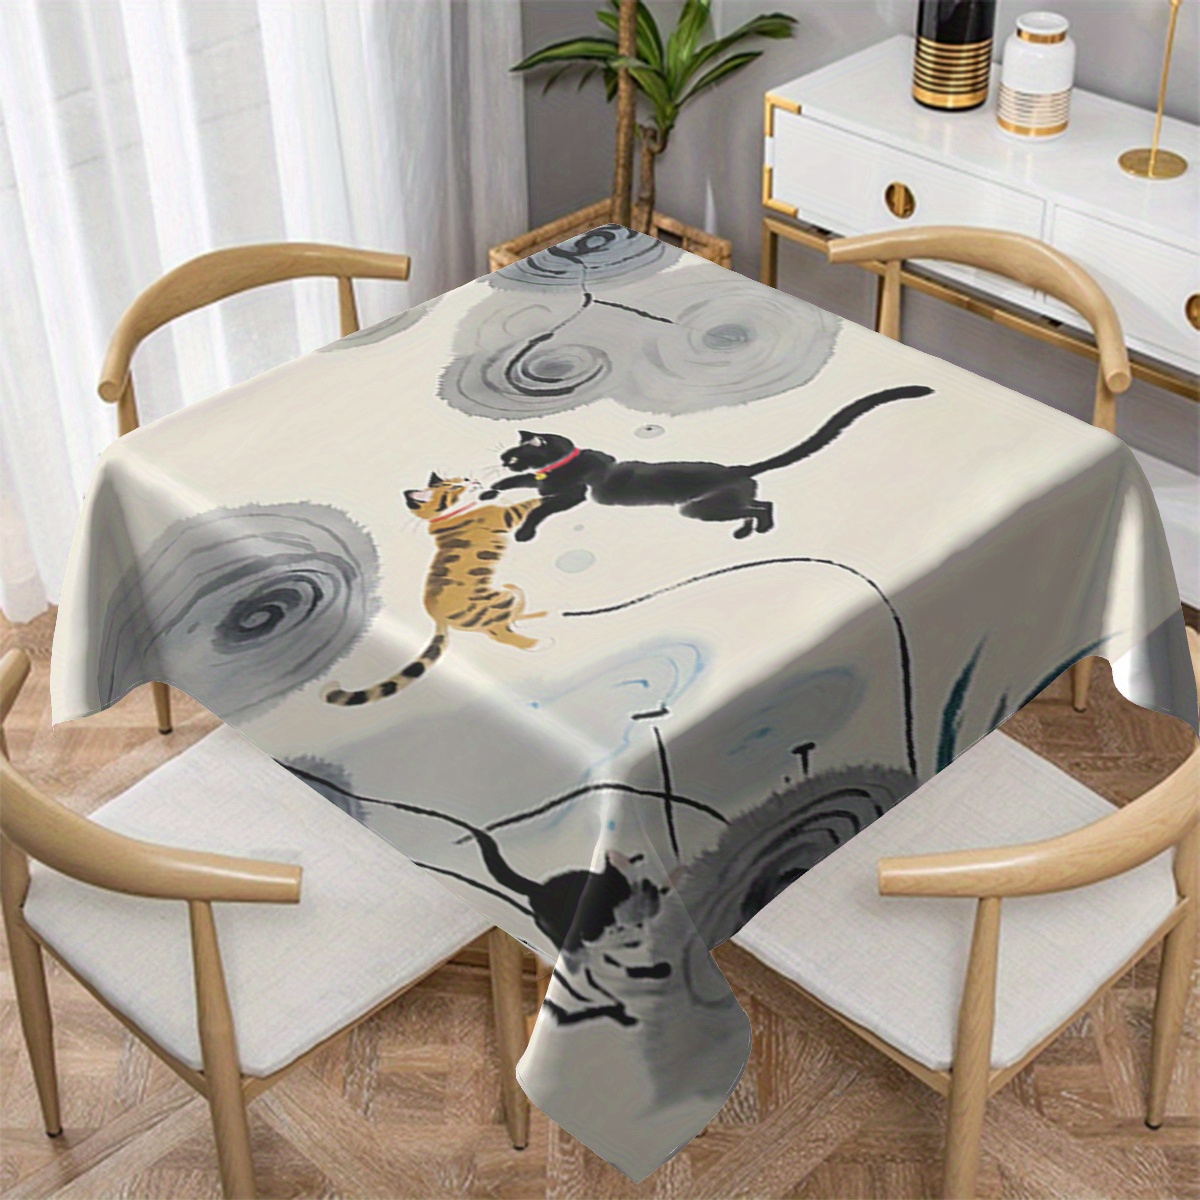 

Charming Yellow & Black Cat Design Tablecloth - Waterproof, Stain-resistant Polyester For Kitchen, Dining, Parties & Outdoor Use